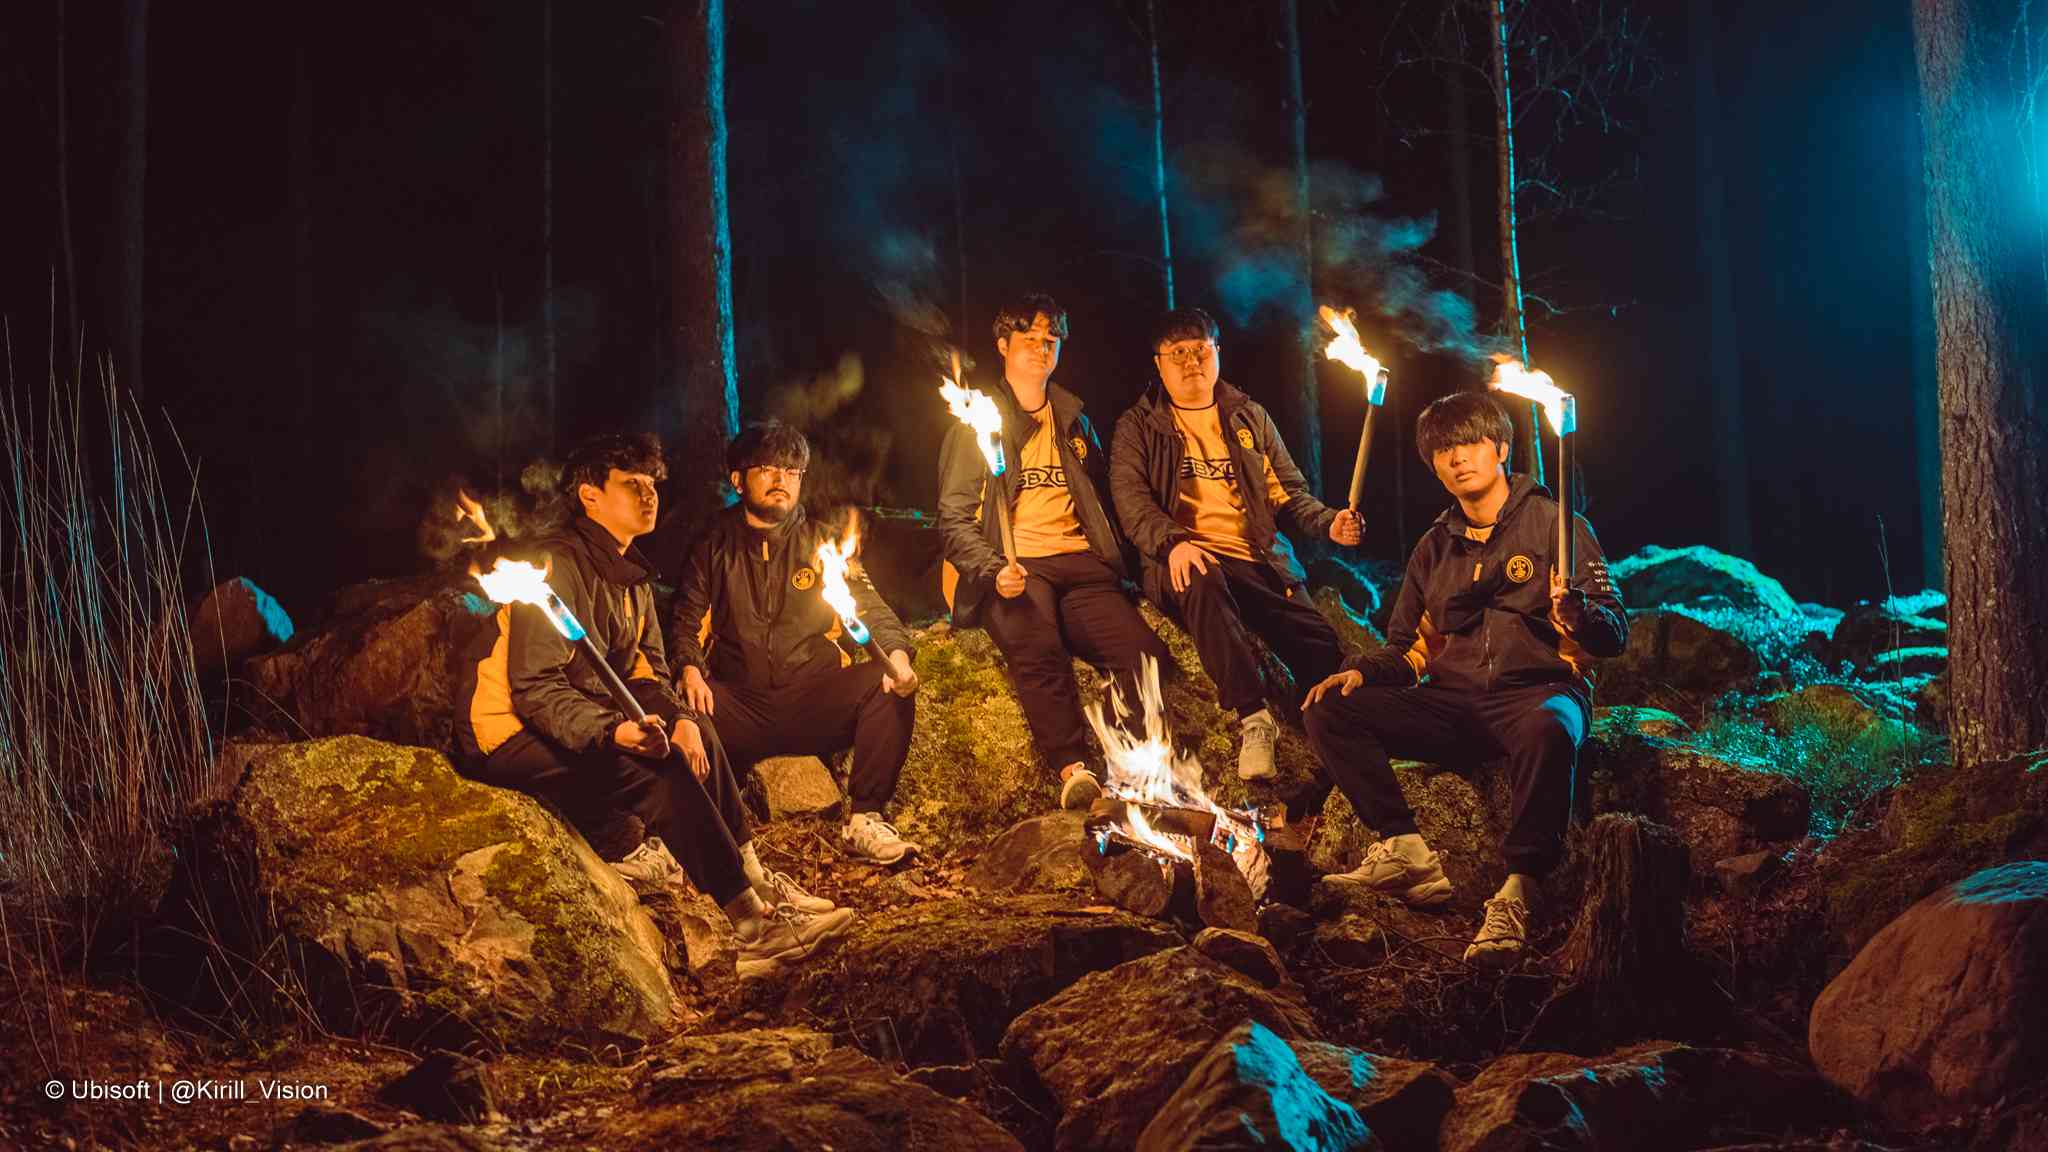 The Rainbow Six roster for SANDBOX sit in the woods at night, holding flaming torches